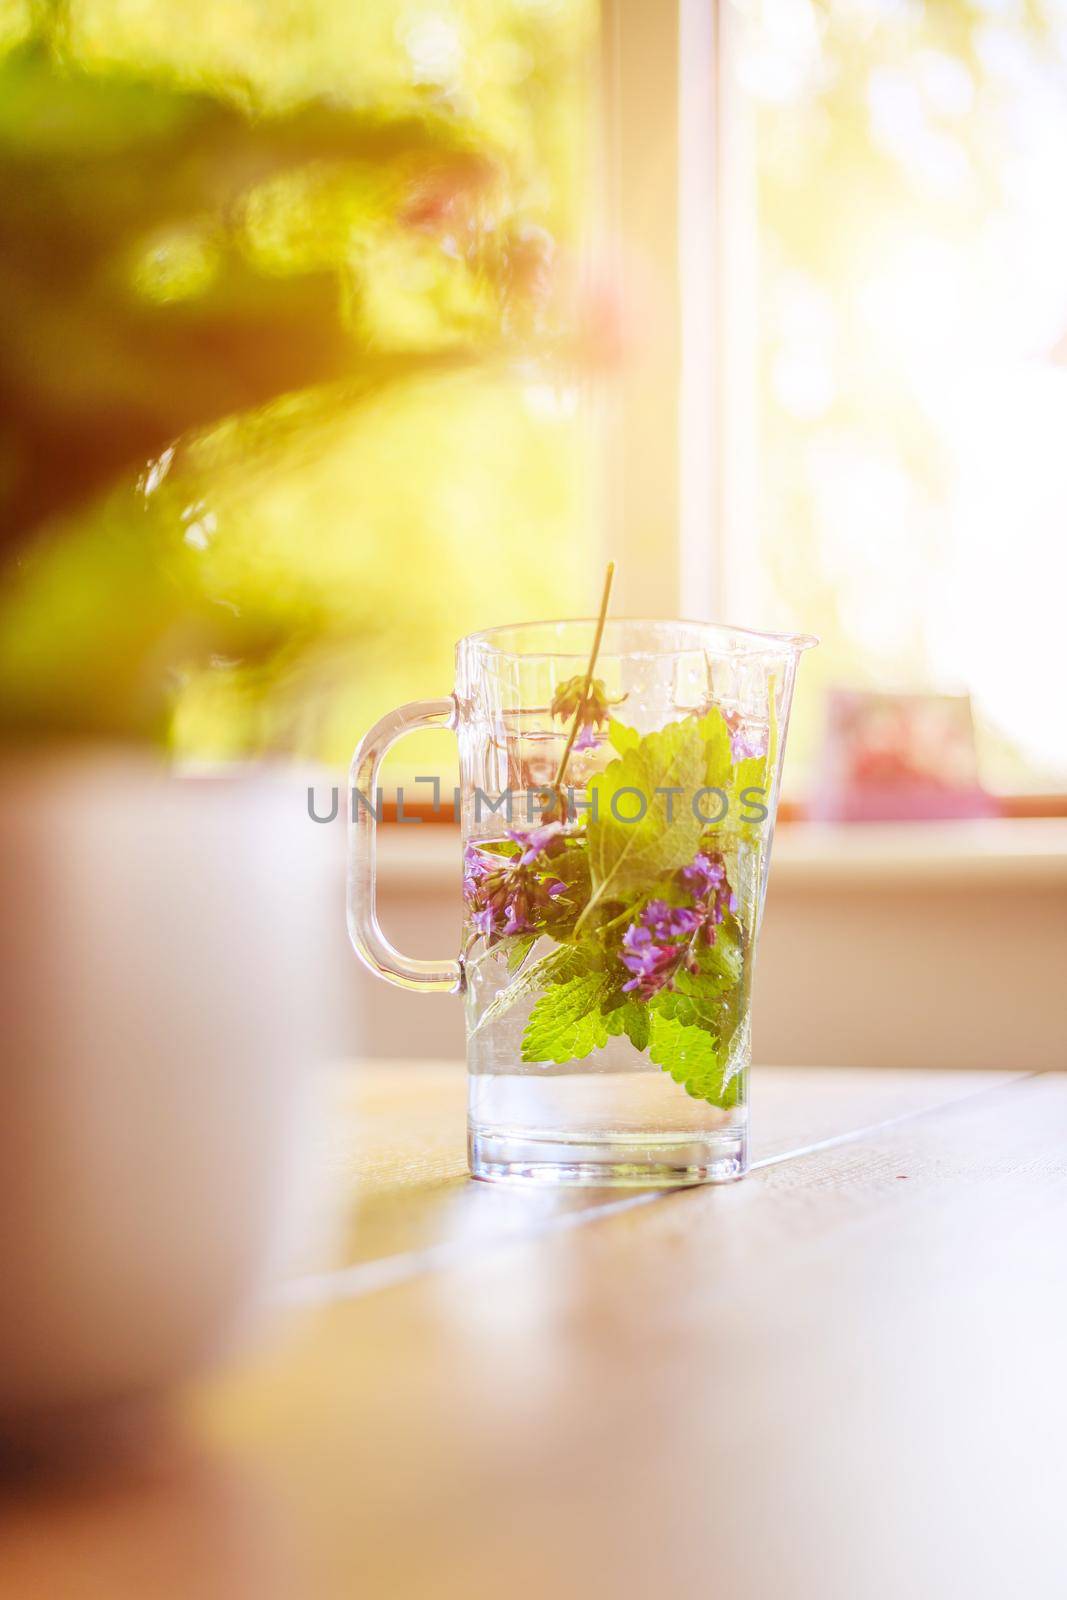 Cold refreshing water jar in summer: Tasty lemonade with herbs, multi colored by Daxenbichler